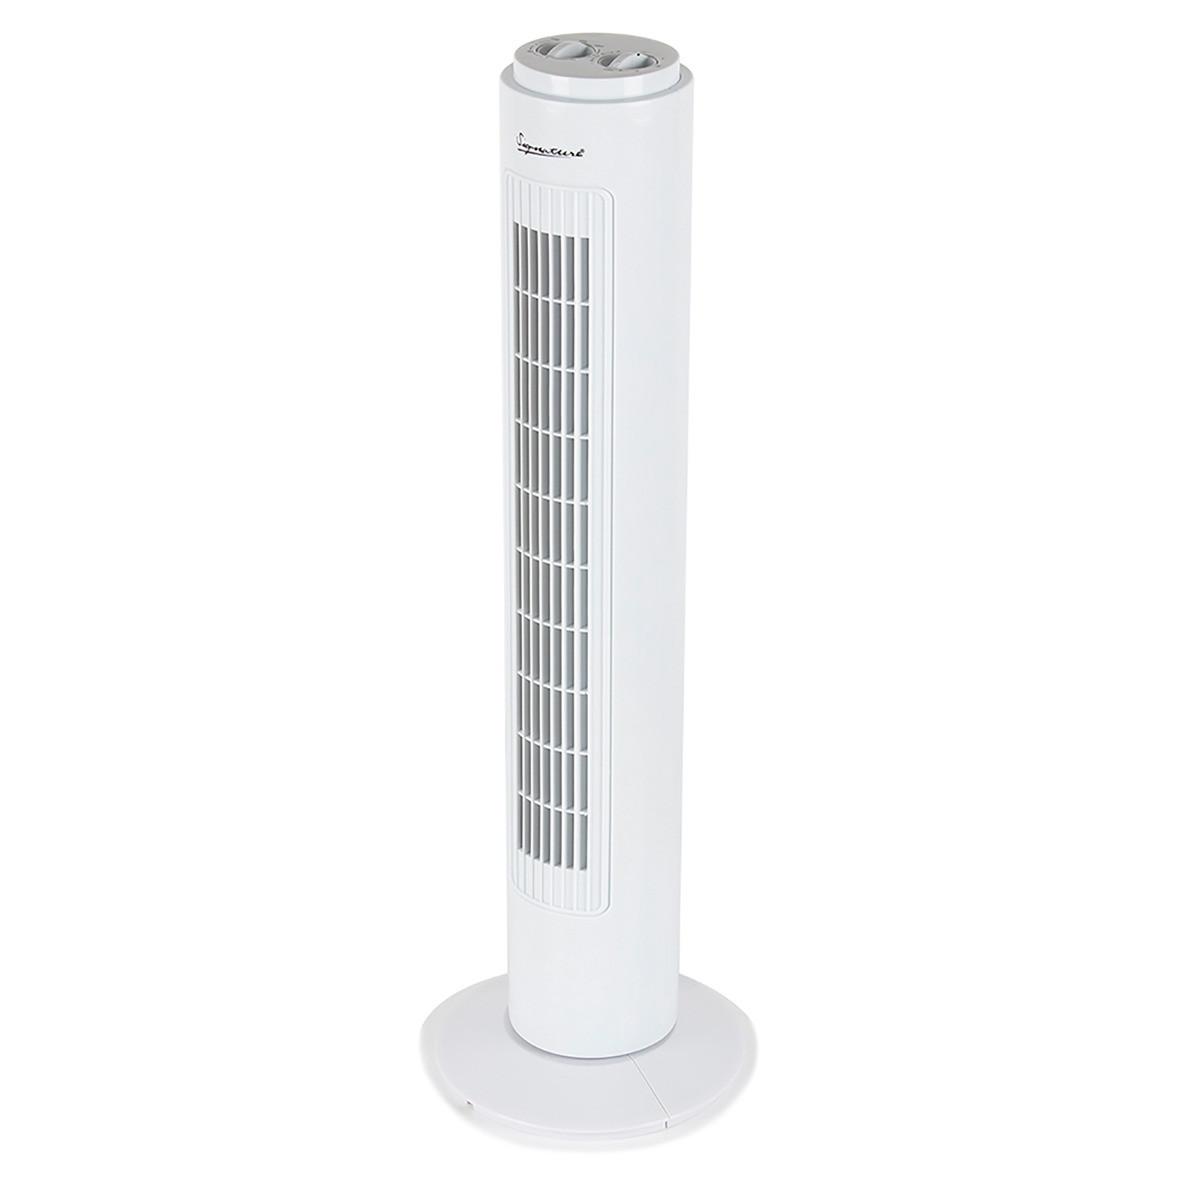 Signature Free Standing Cooling Tower Fan, White - 29">